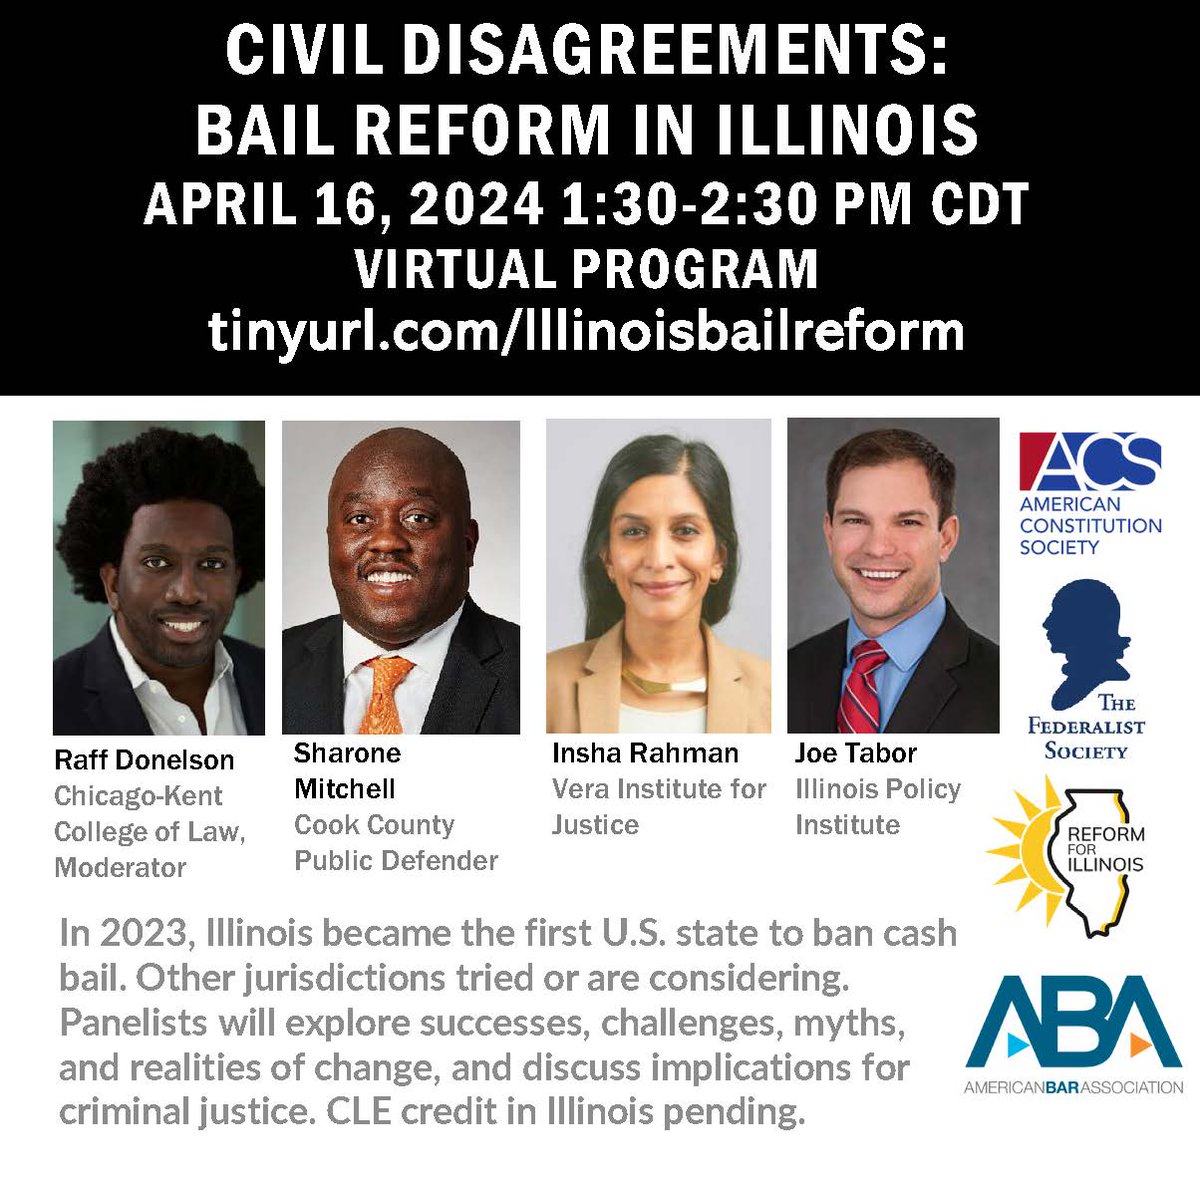 I'm really looking forward to this event in 2 weeks! 

#endcashbail